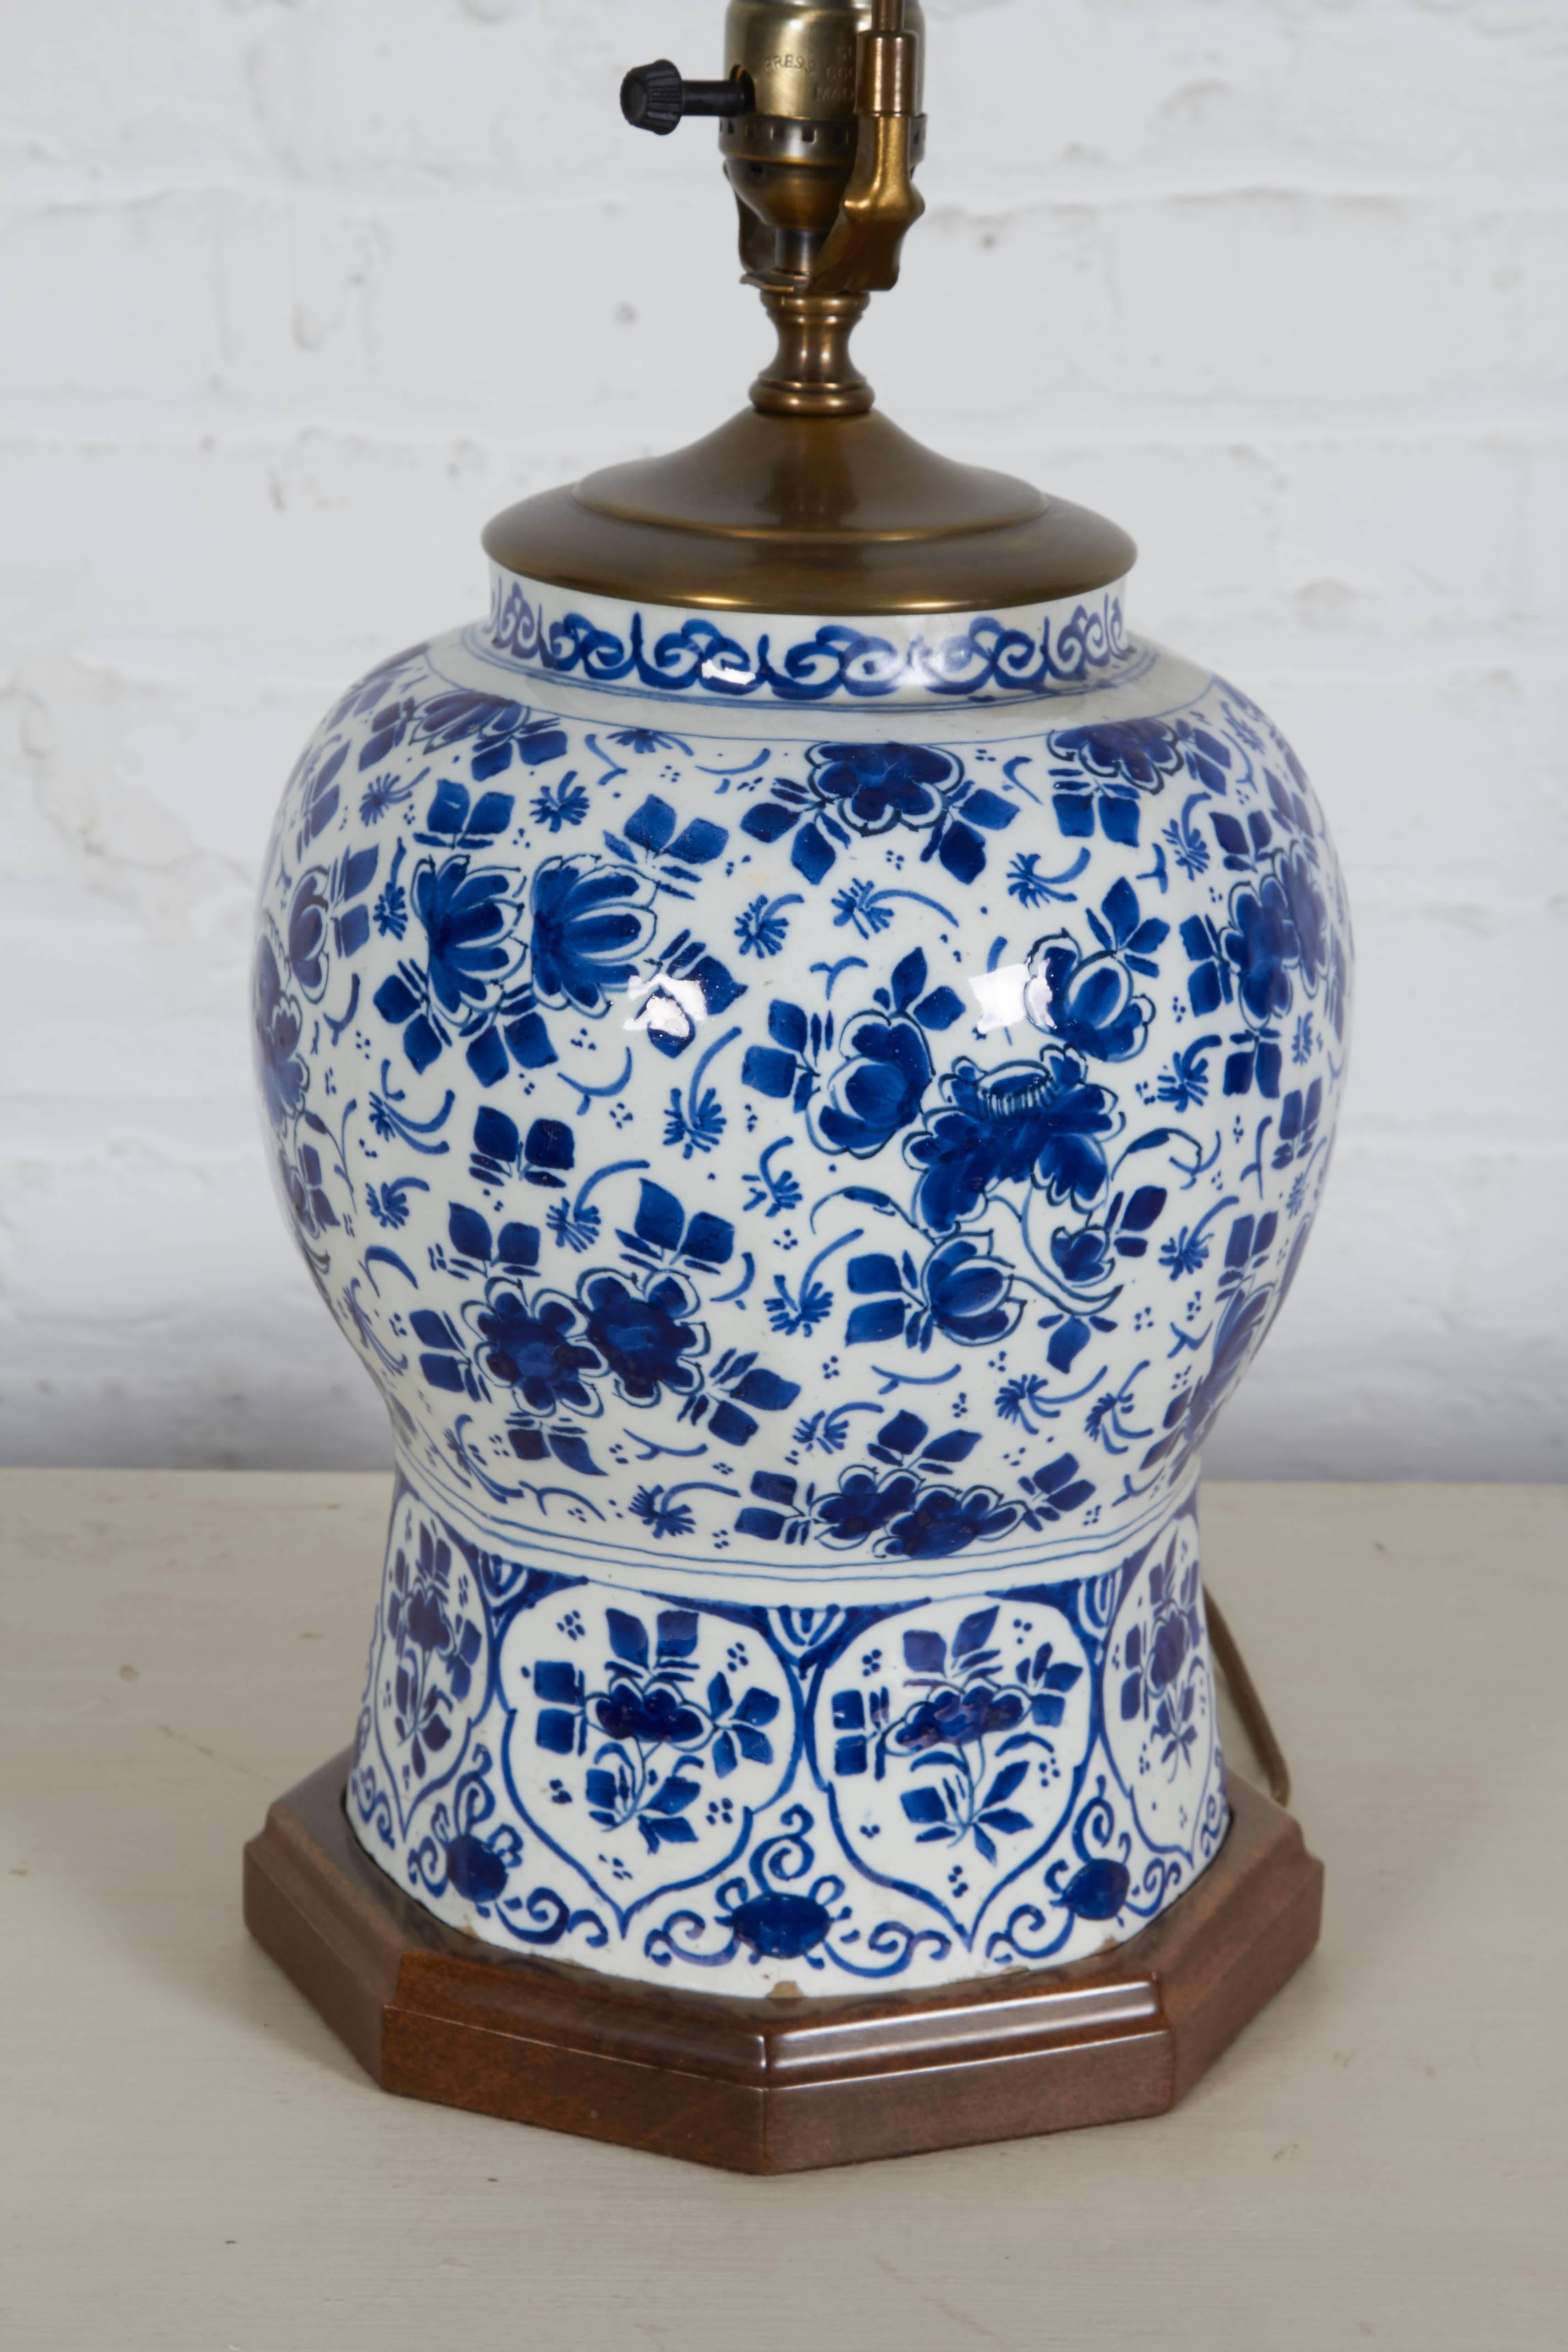 Chinoiserie 18th Century Delft Blue and White Vase Mounted as a Lamp